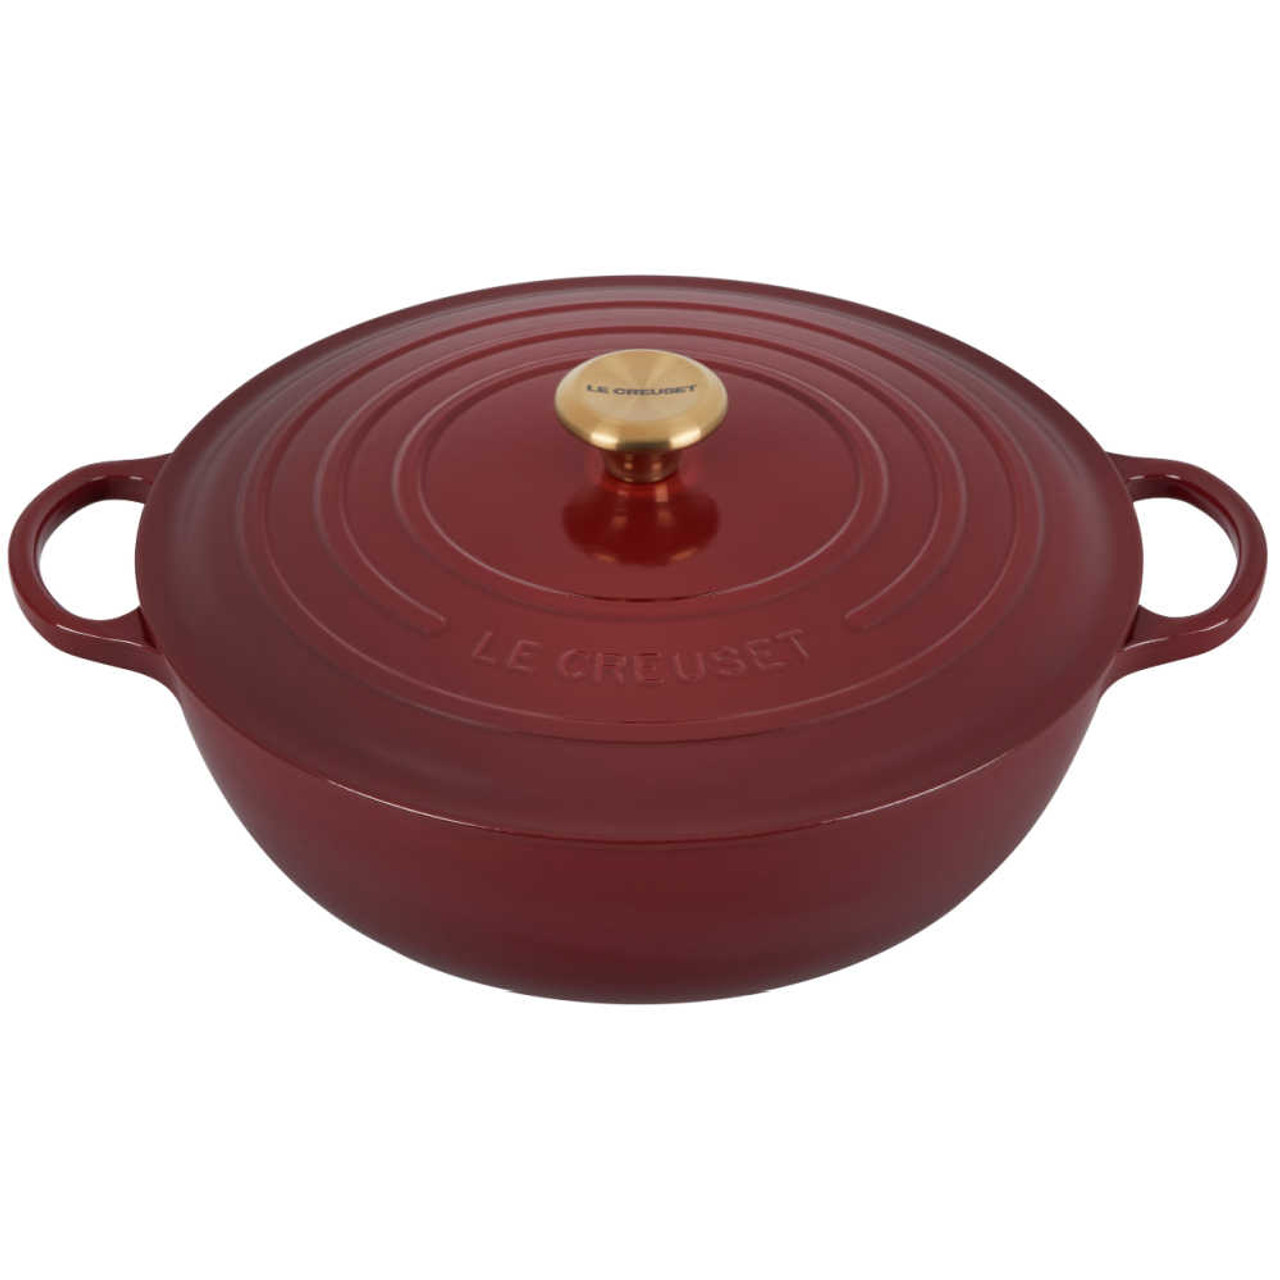 https://cdn11.bigcommerce.com/s-hccytny0od/images/stencil/1280x1280/products/5558/24306/Le_Creuset_Signature_Chefs_Oven_in_Rhone__50167.1691002648.jpg?c=2?imbypass=on